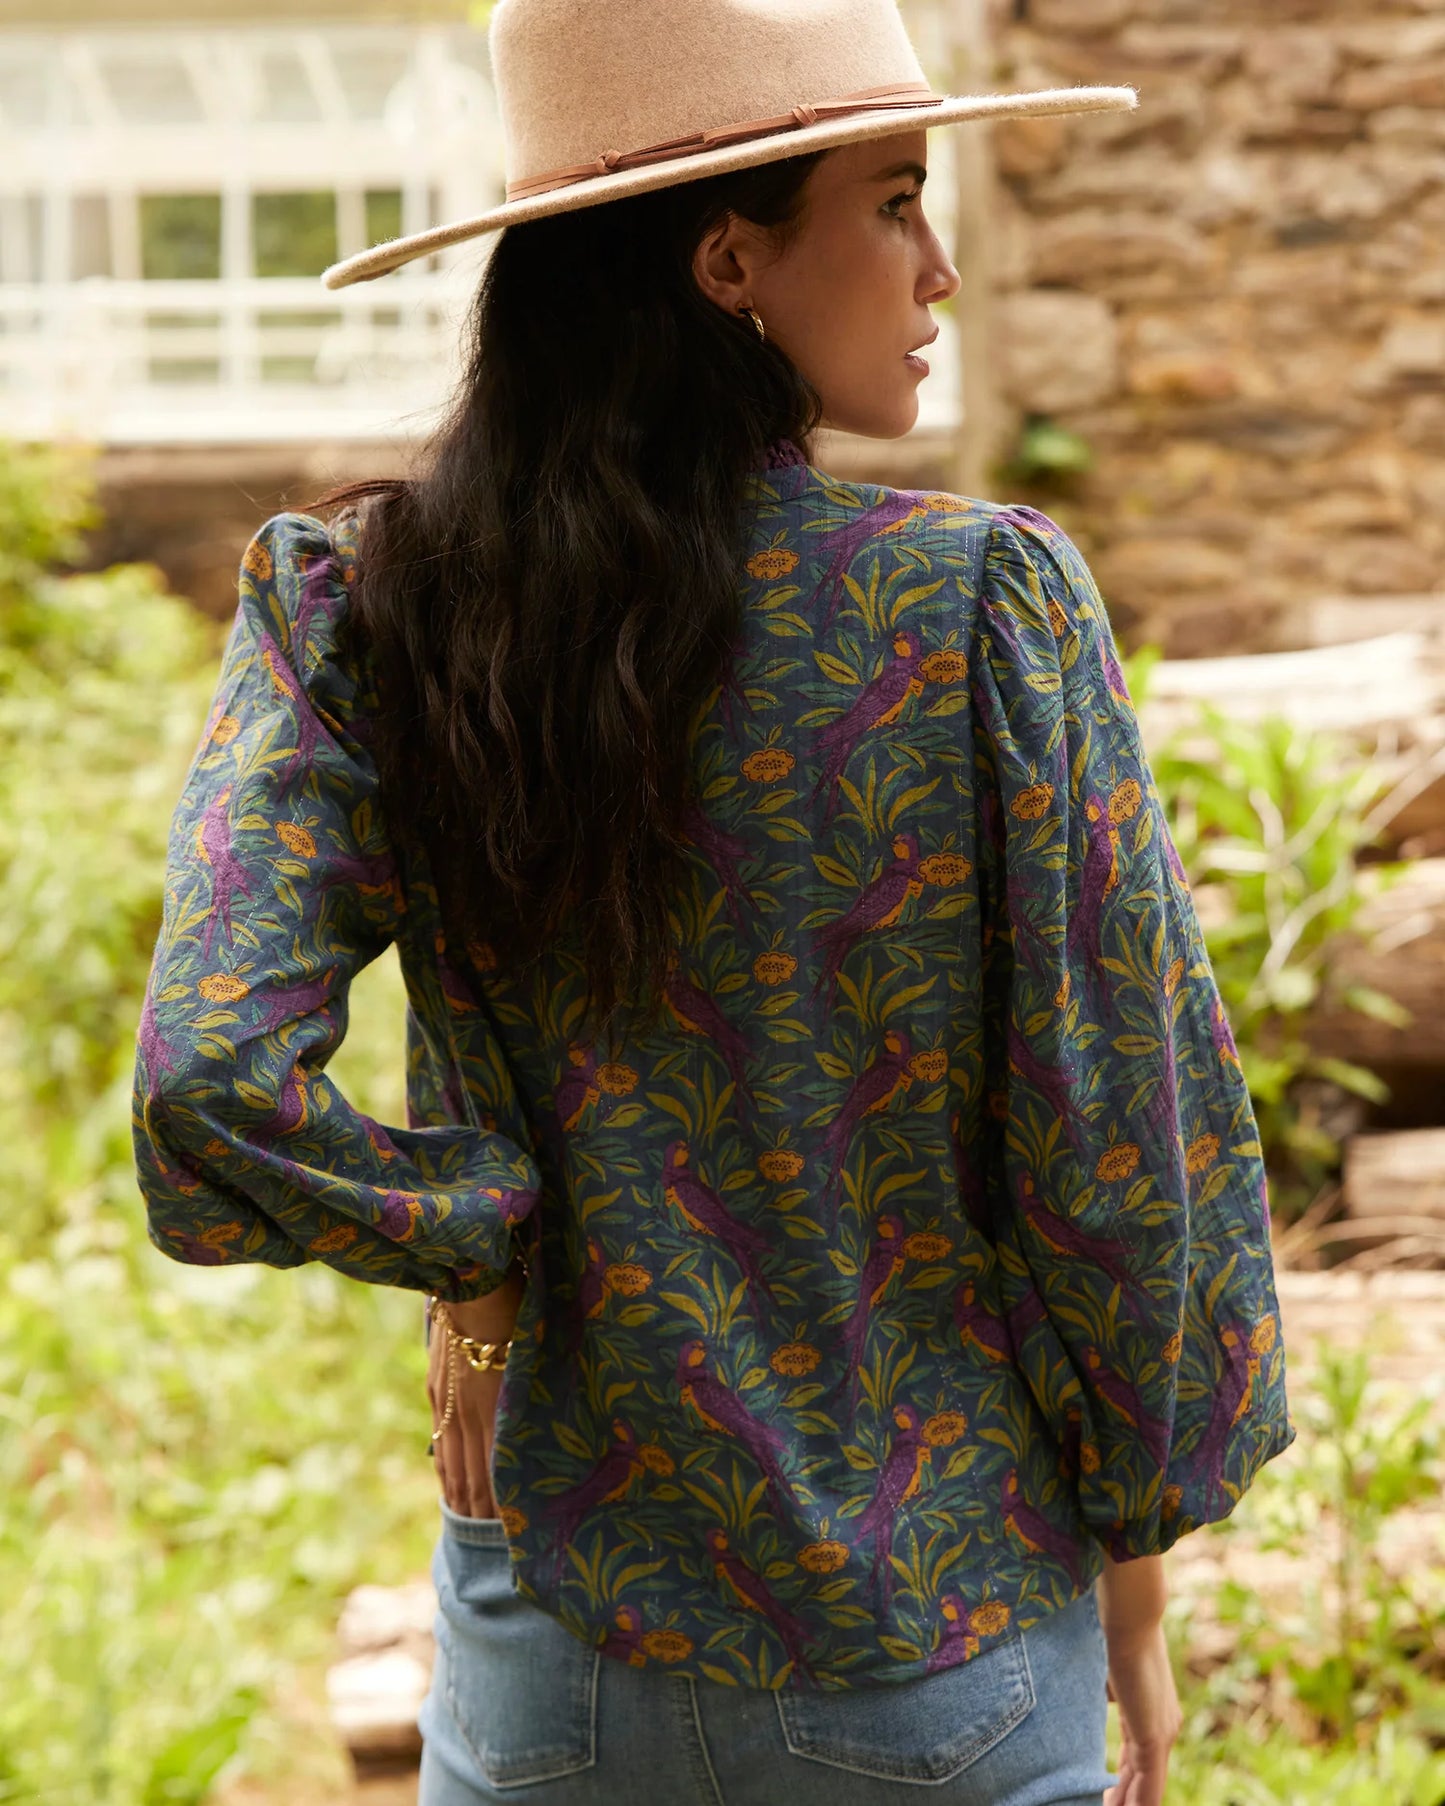 Birdsong - On the Books Blouse